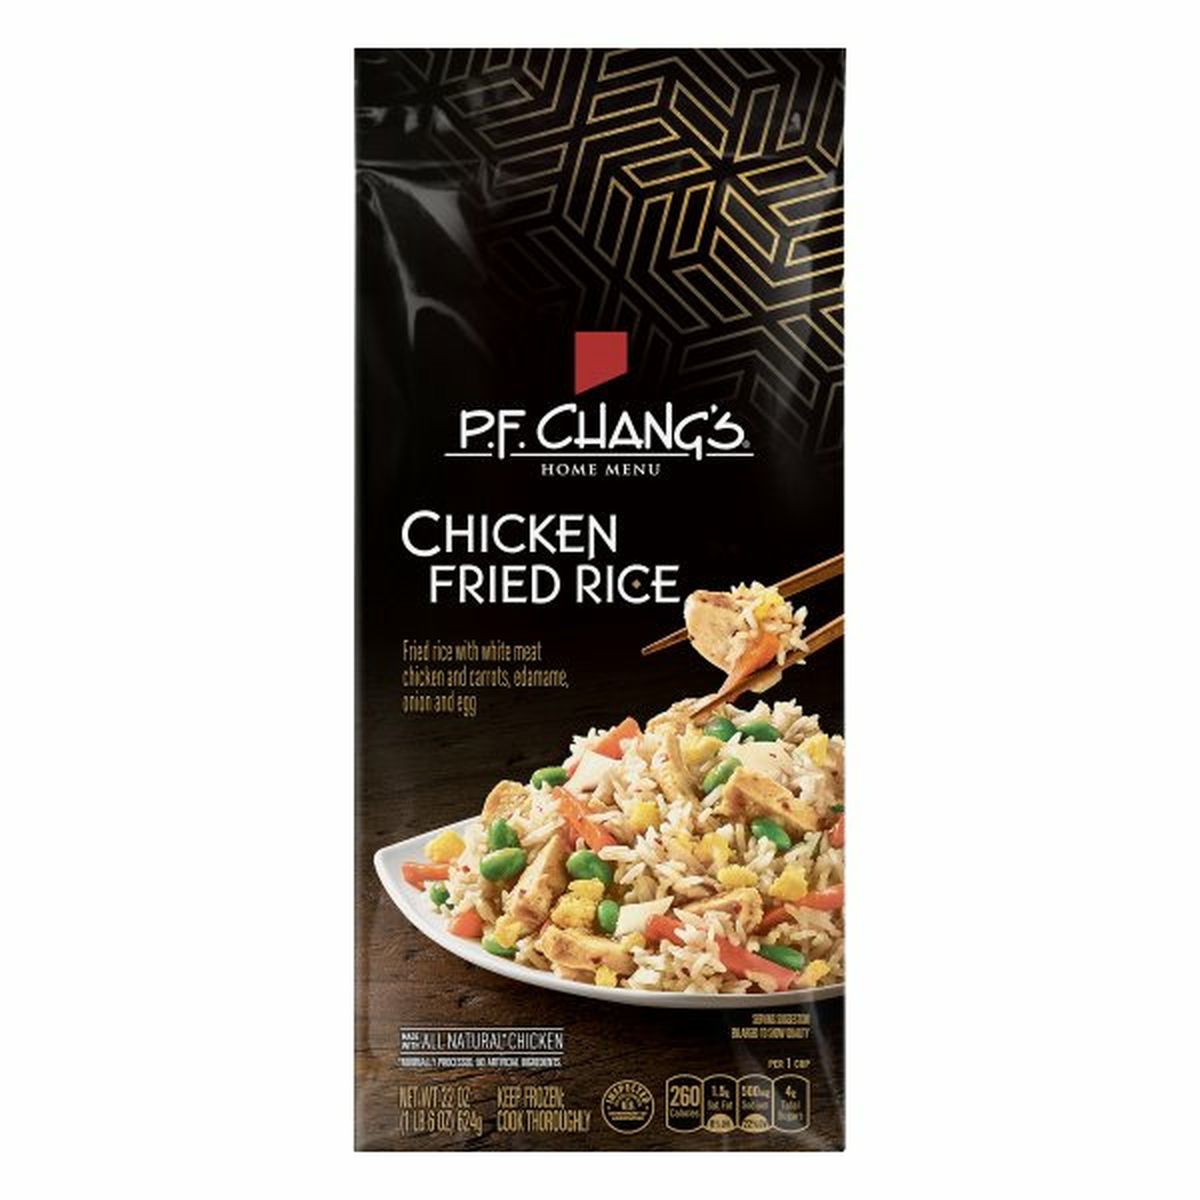 Calories in P.F. Chang's Chicken Fried Rice